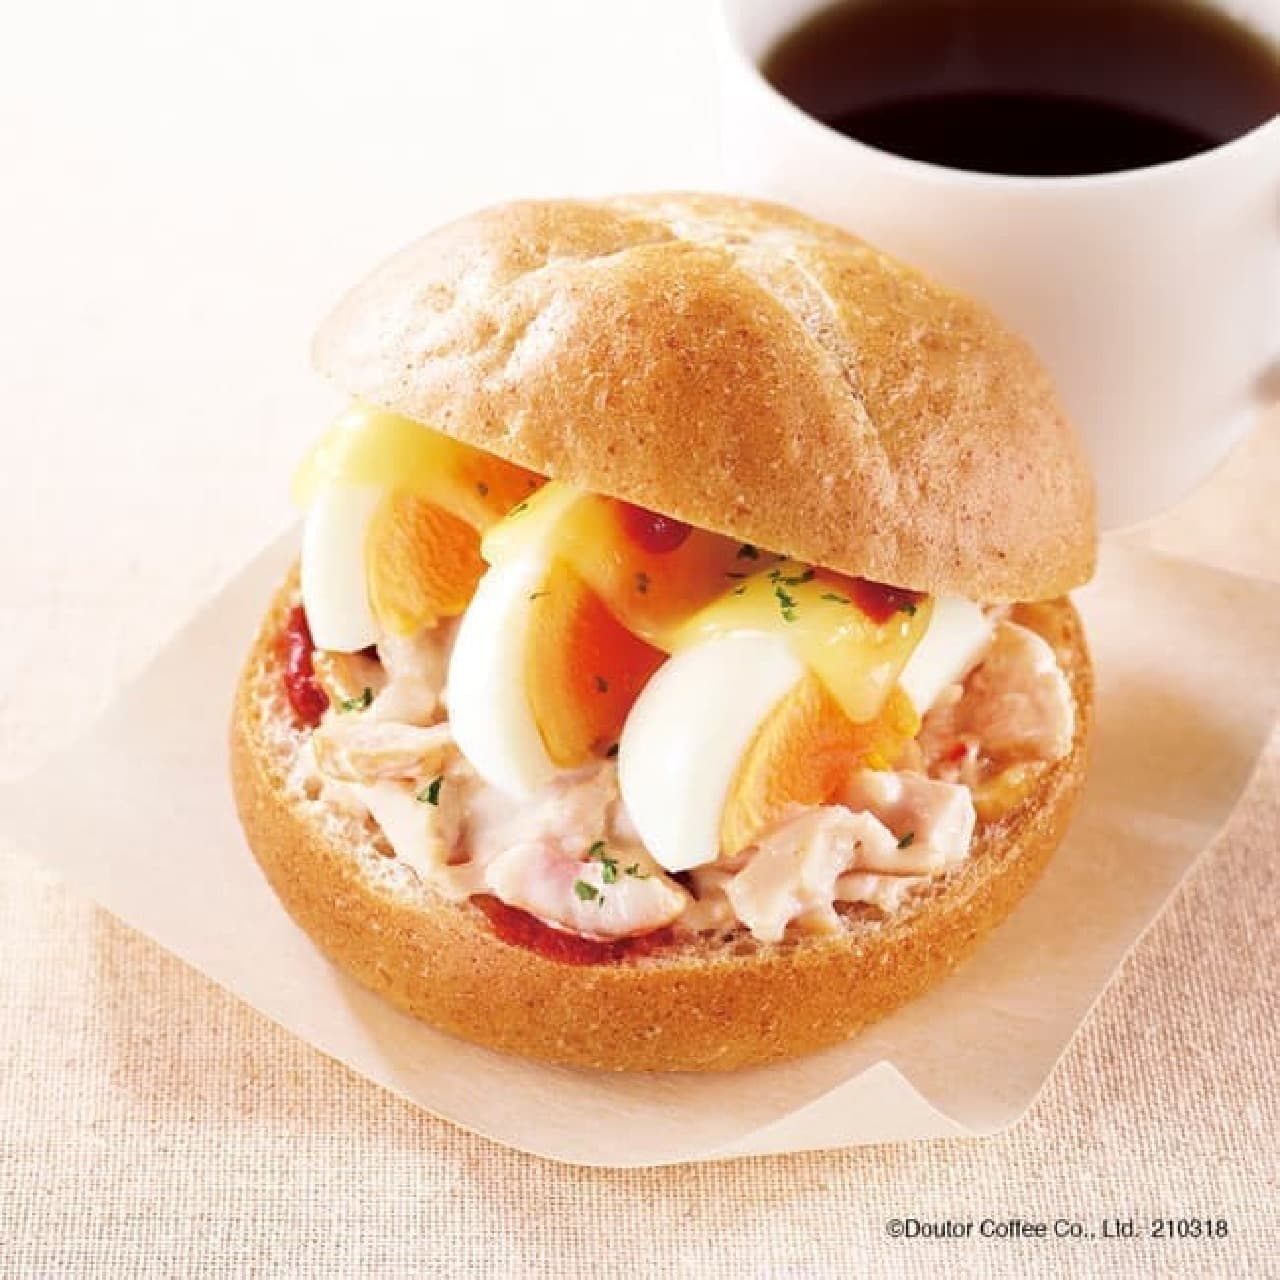 Doutor Coffee Shop "Morning Set B Smoked Chicken and Eggs"